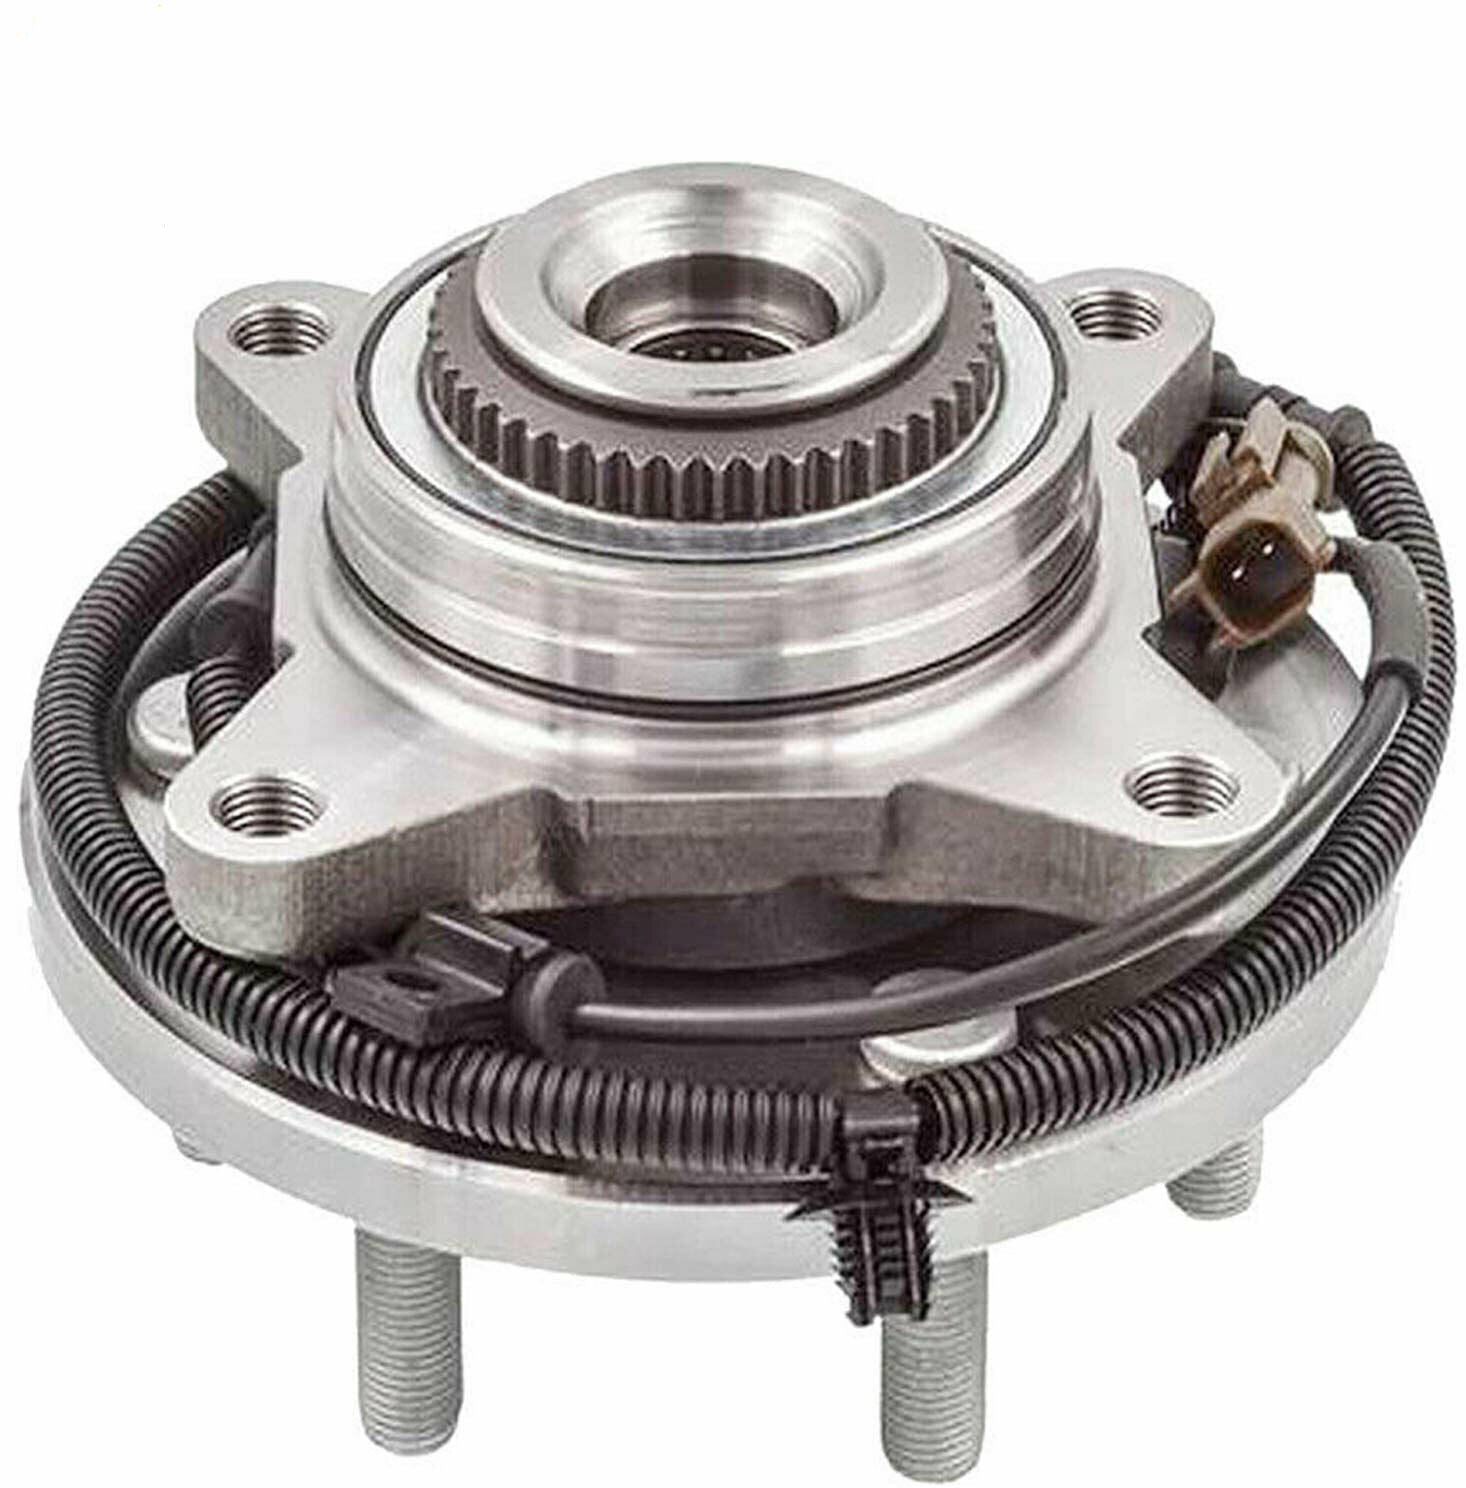 JADODE 515169 Front Wheel Hub & Bearing Assembly fits 2015 2016 2017 Ford F-150 4X4 4WD